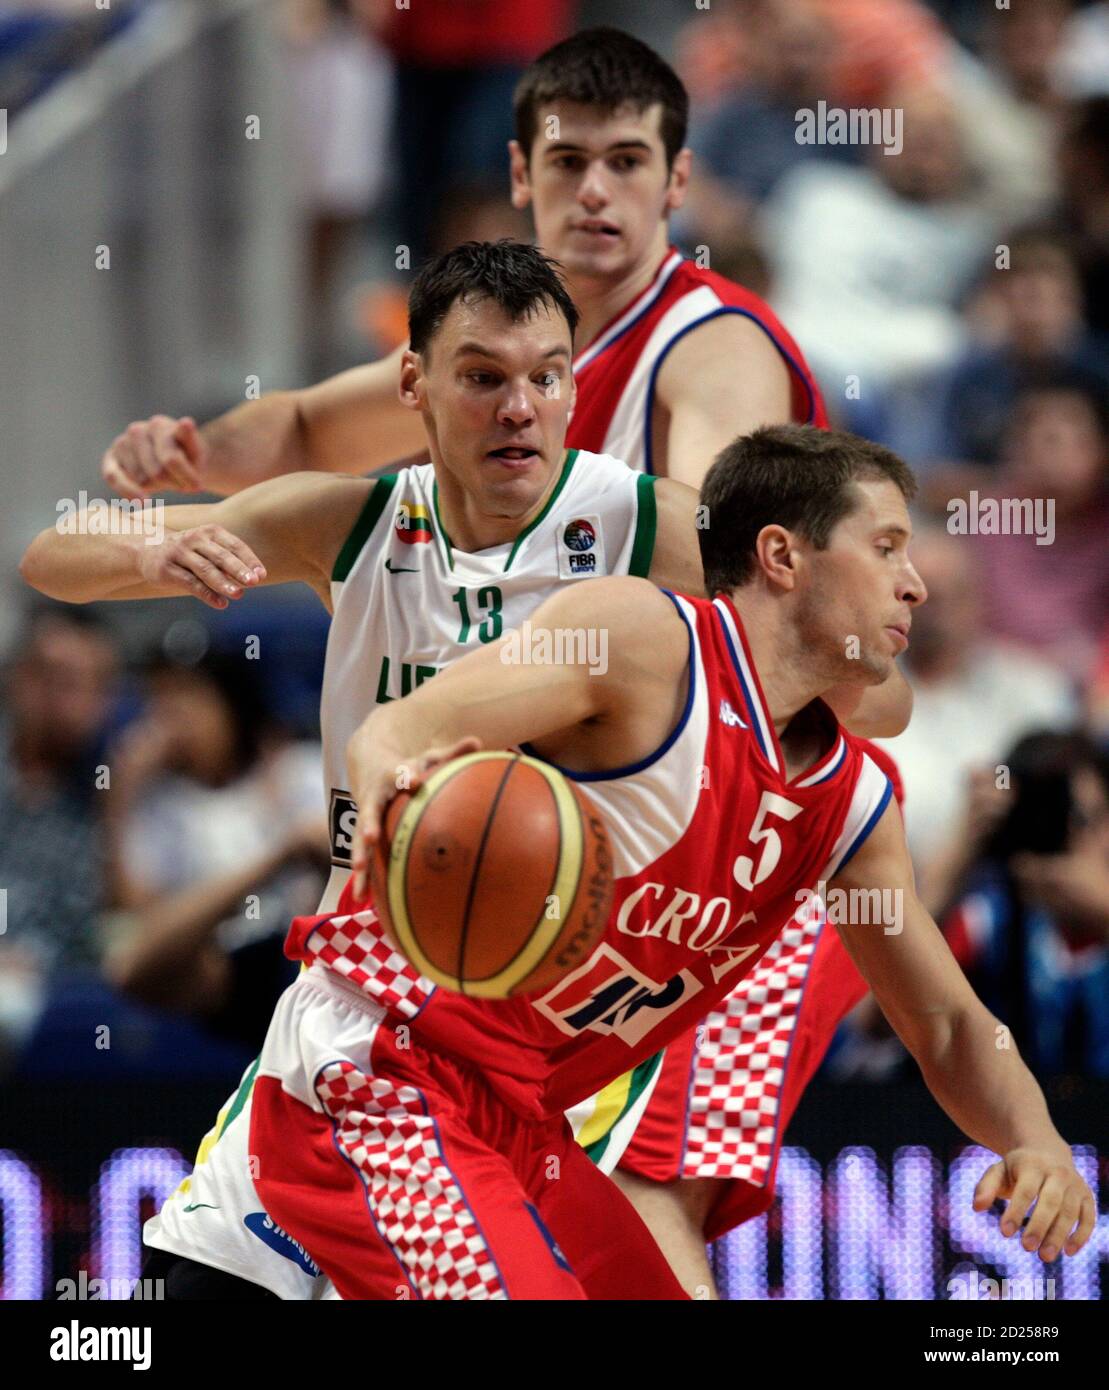 Croatia's Davor Kus (front) drives the ball past Lithuania's Sarunas  Jasikevicius as Croatia's Stanko Barac (back) looks on during their  quarter-final game at European Basketball Championship in Madrid September  14, 2007. REUTERS/Victor